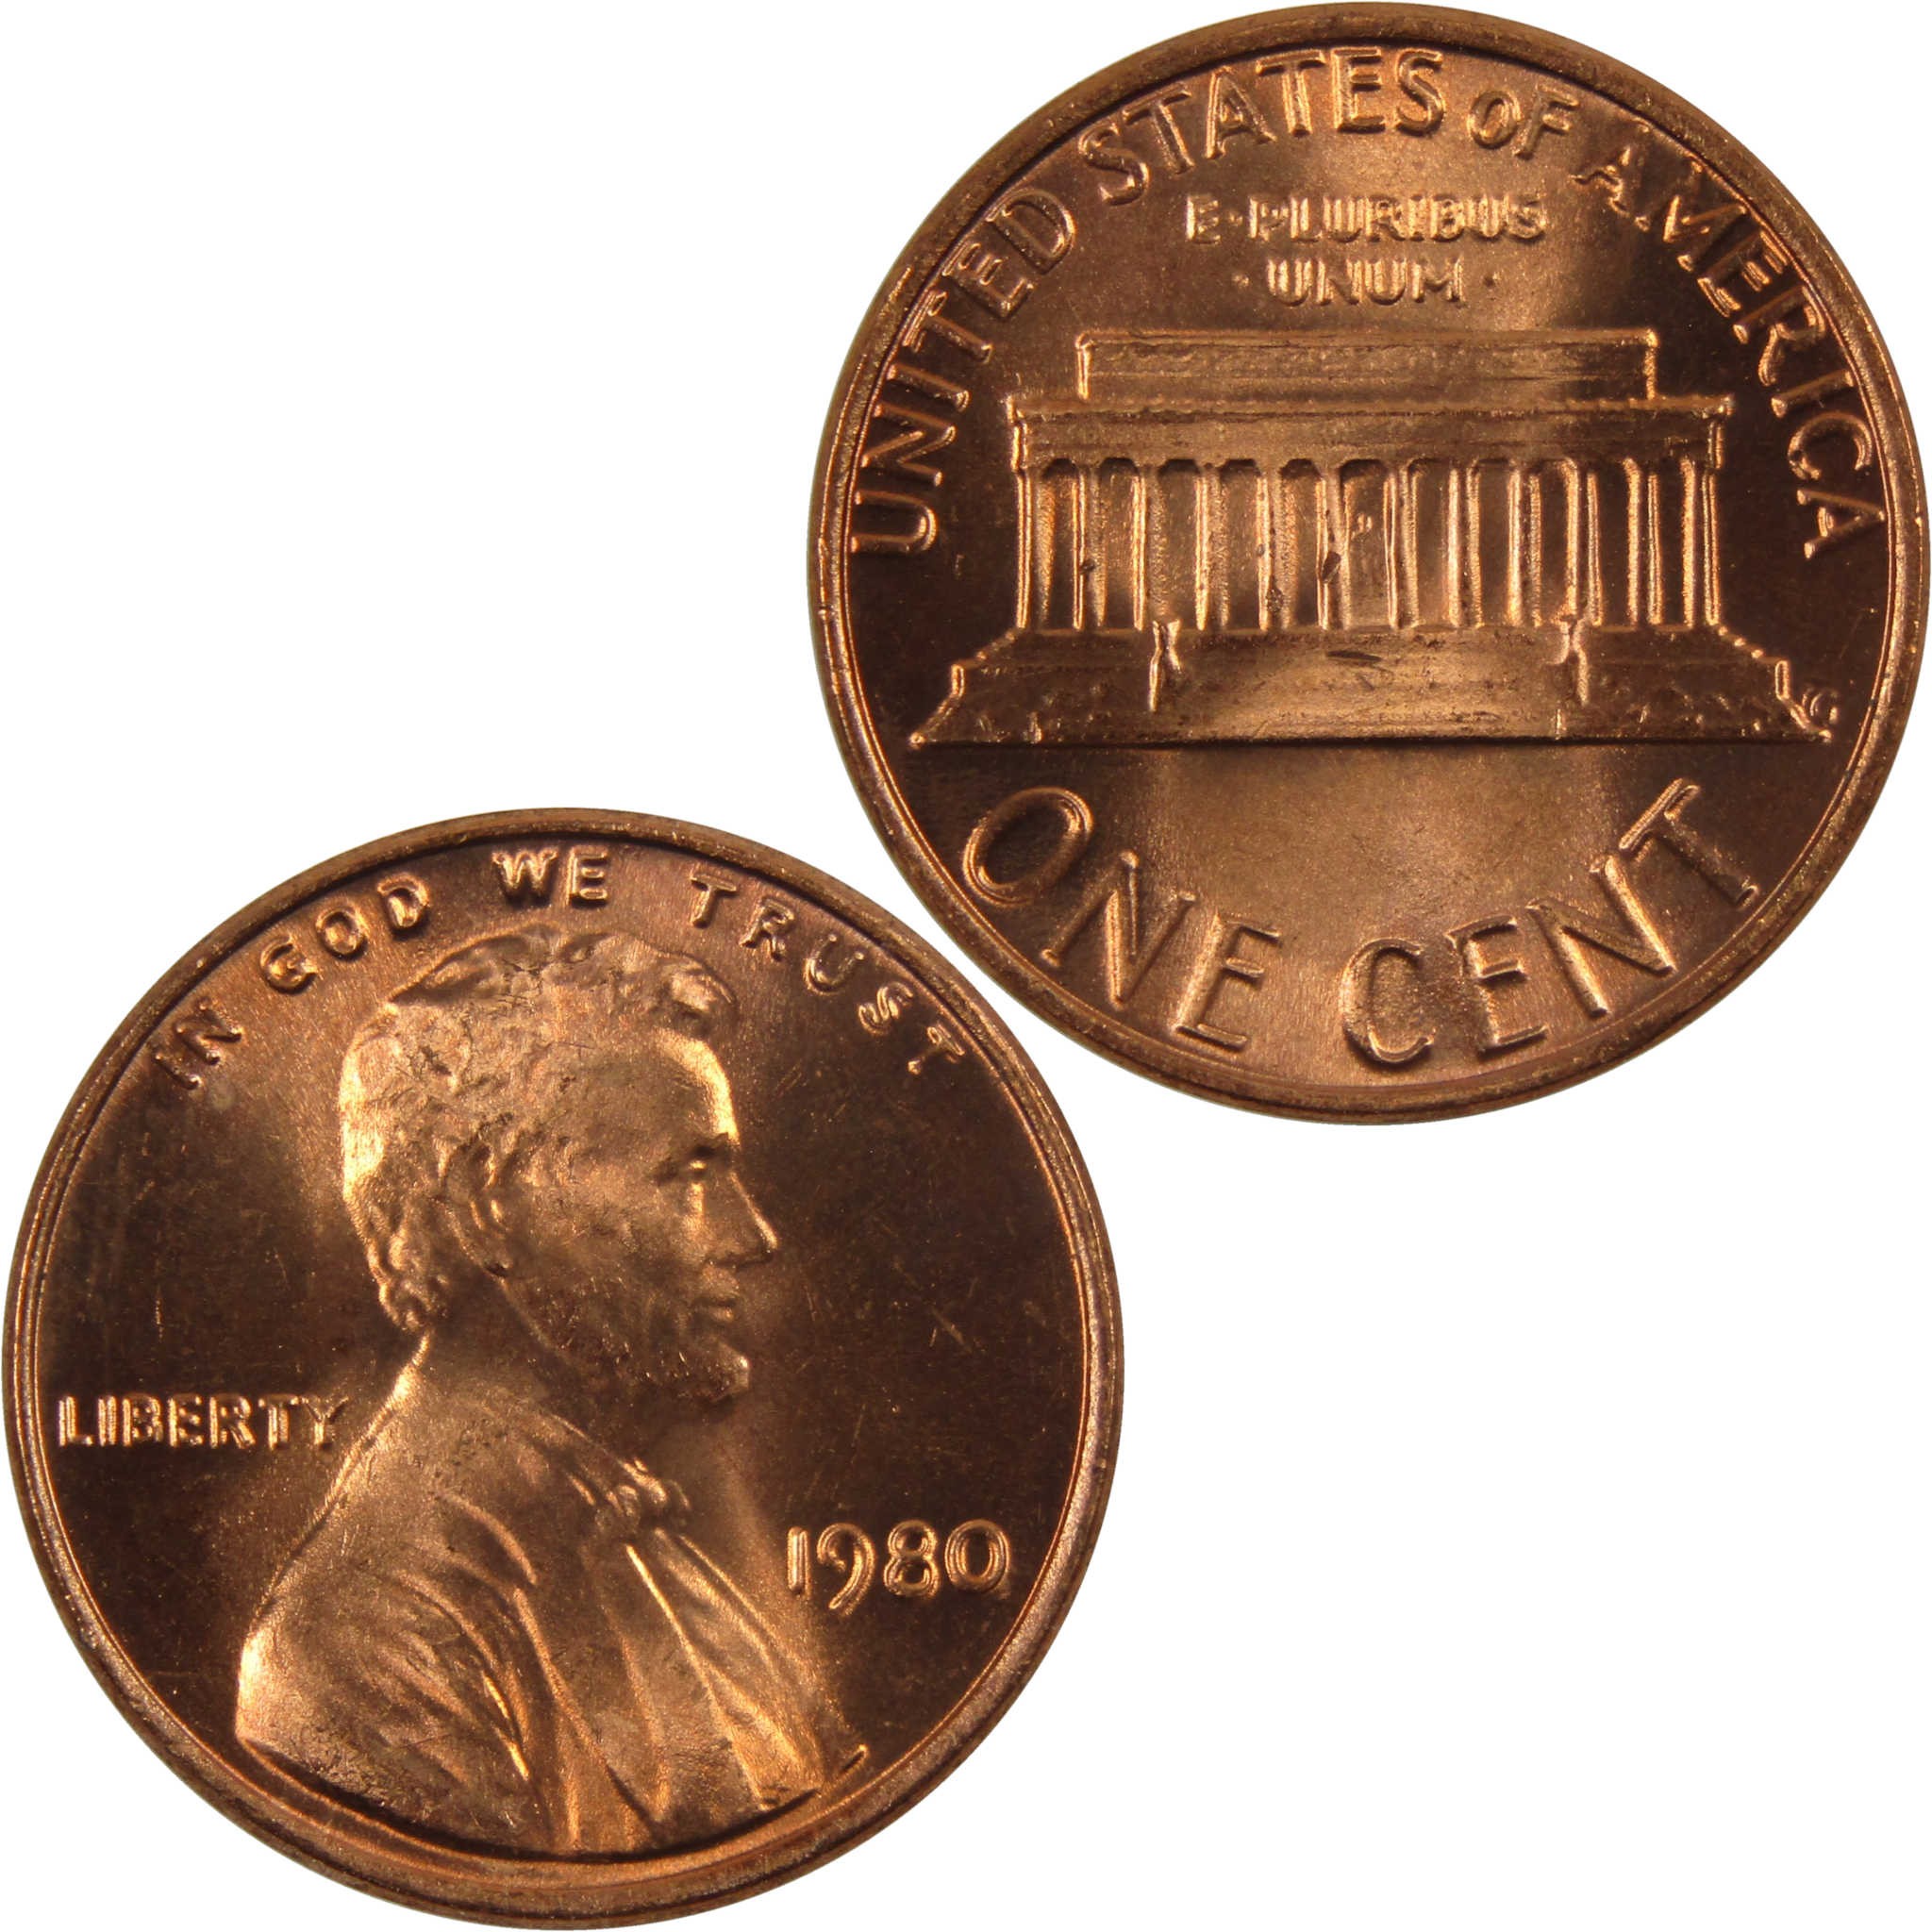 1980 Lincoln Memorial Cent BU Uncirculated Penny 1c Coin